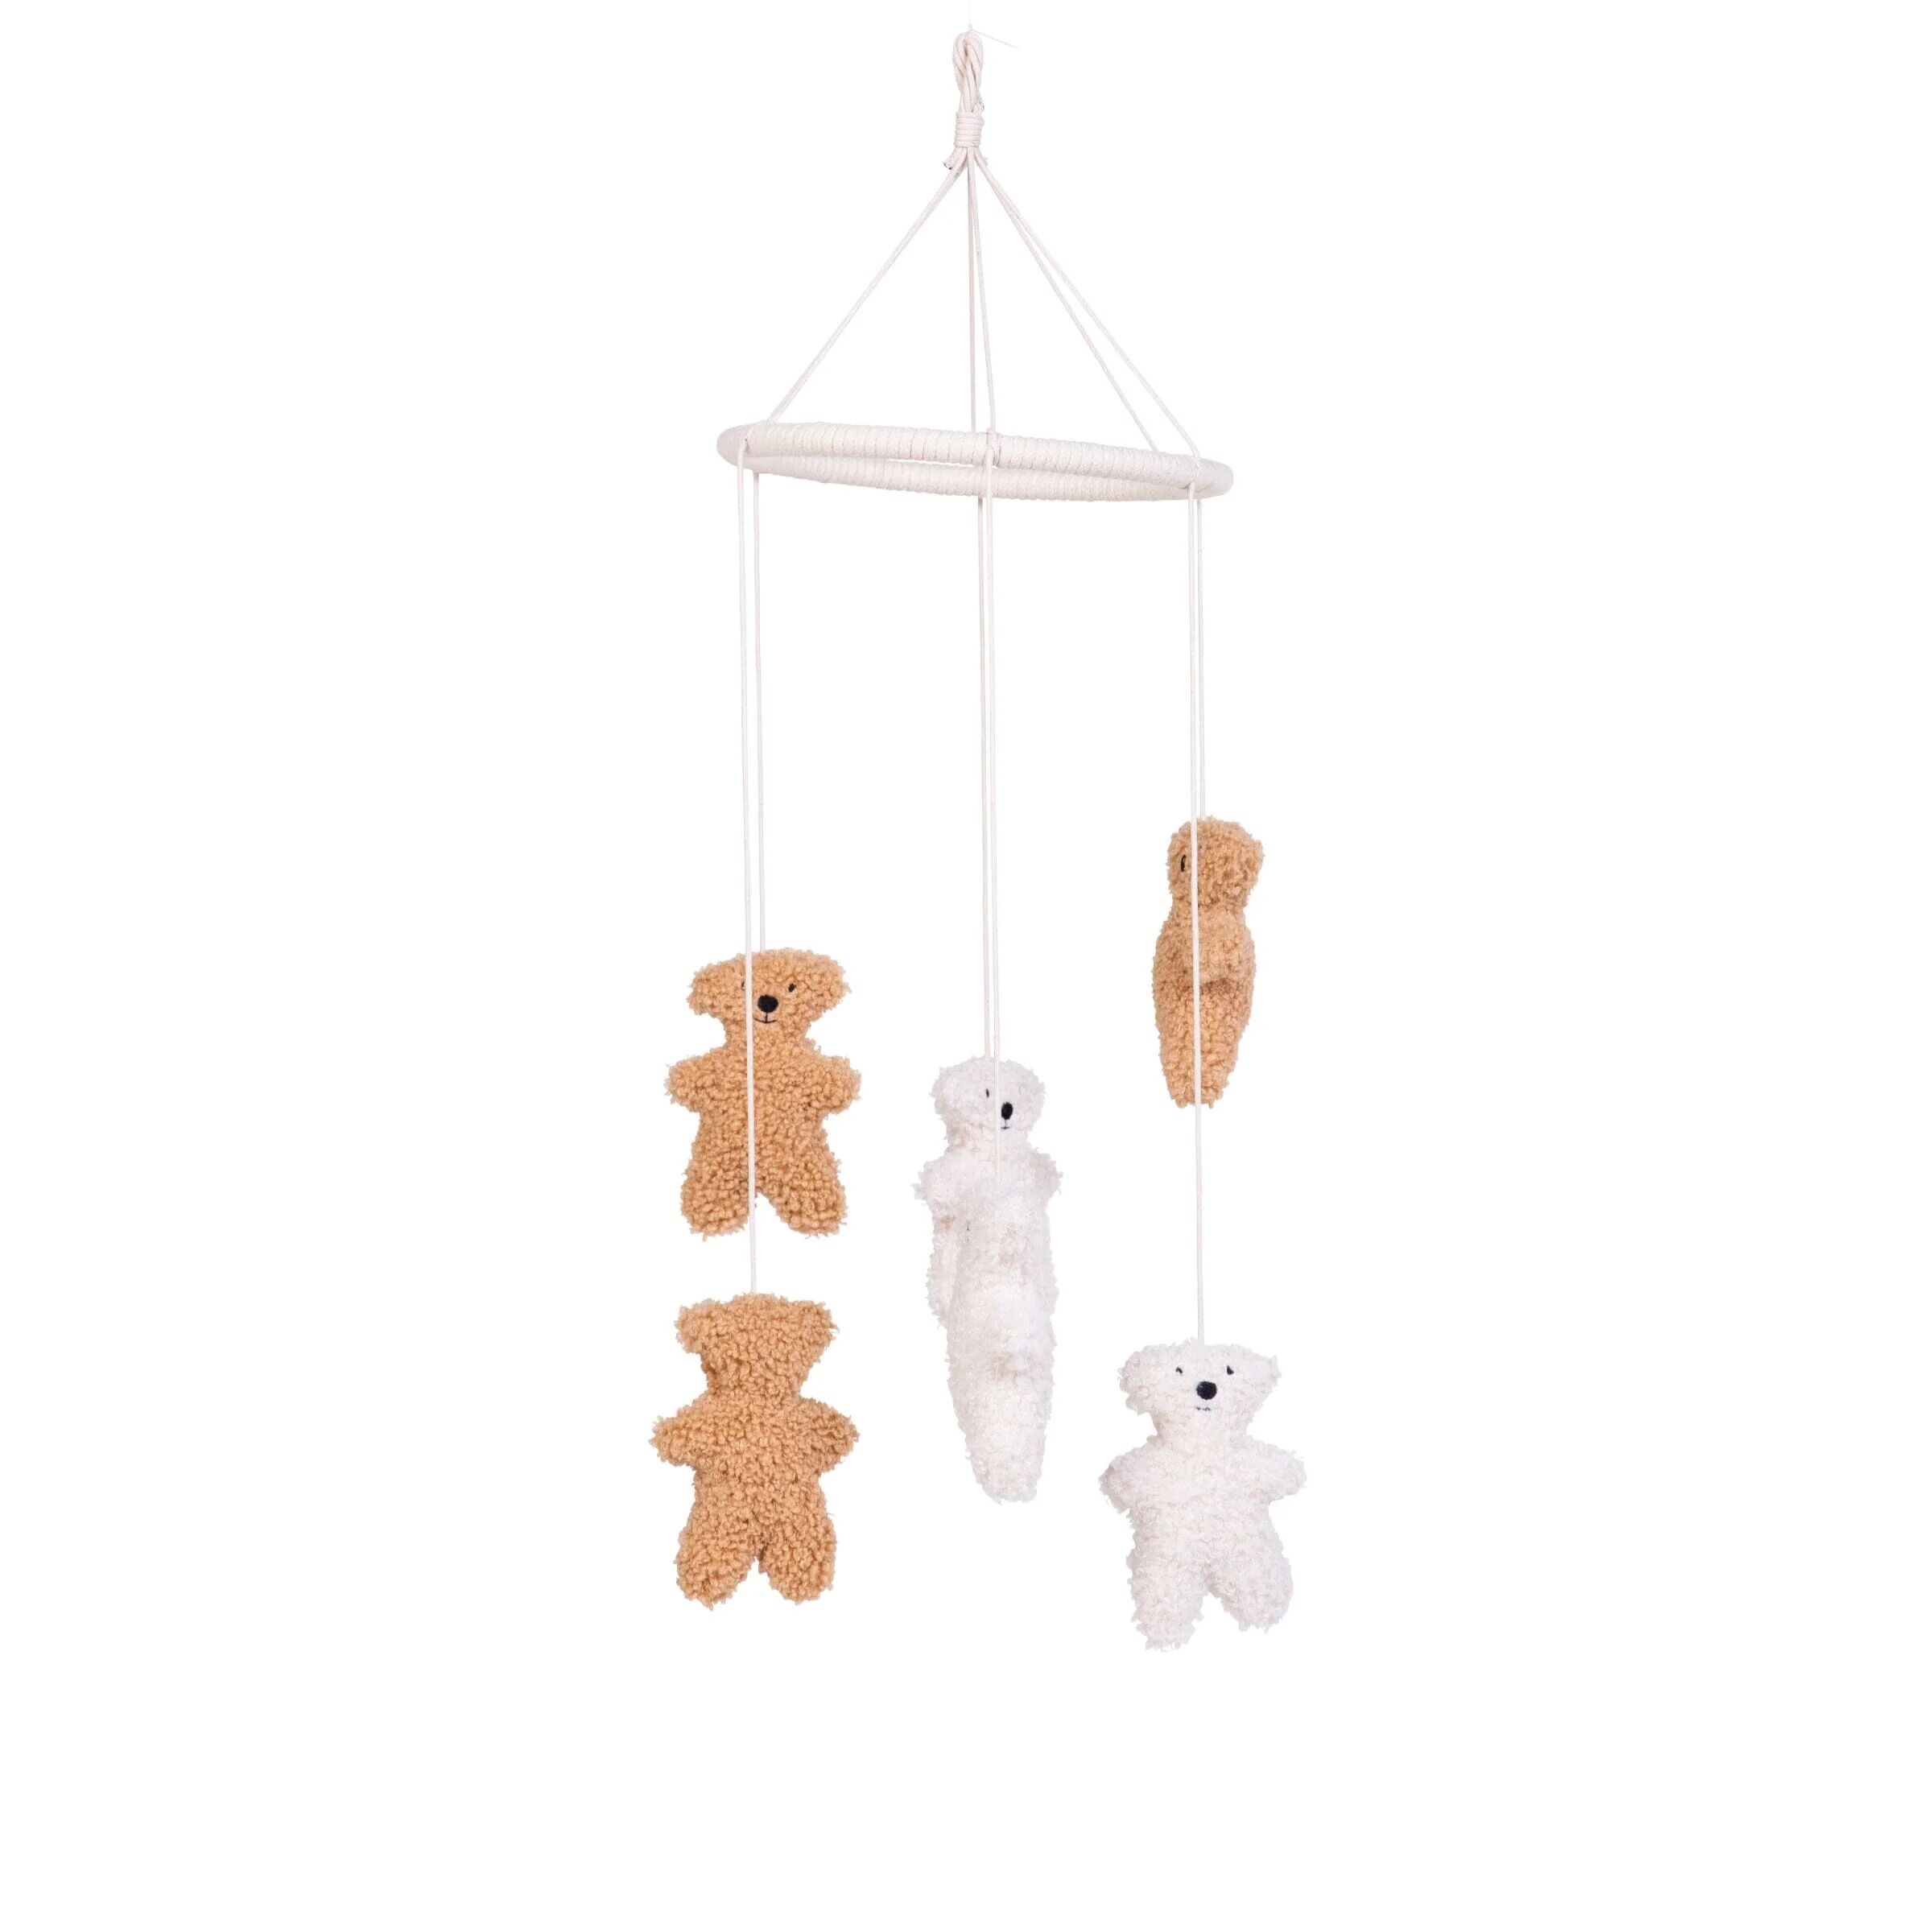 Childhome Play Gym Toys - Teddy - Set of 4